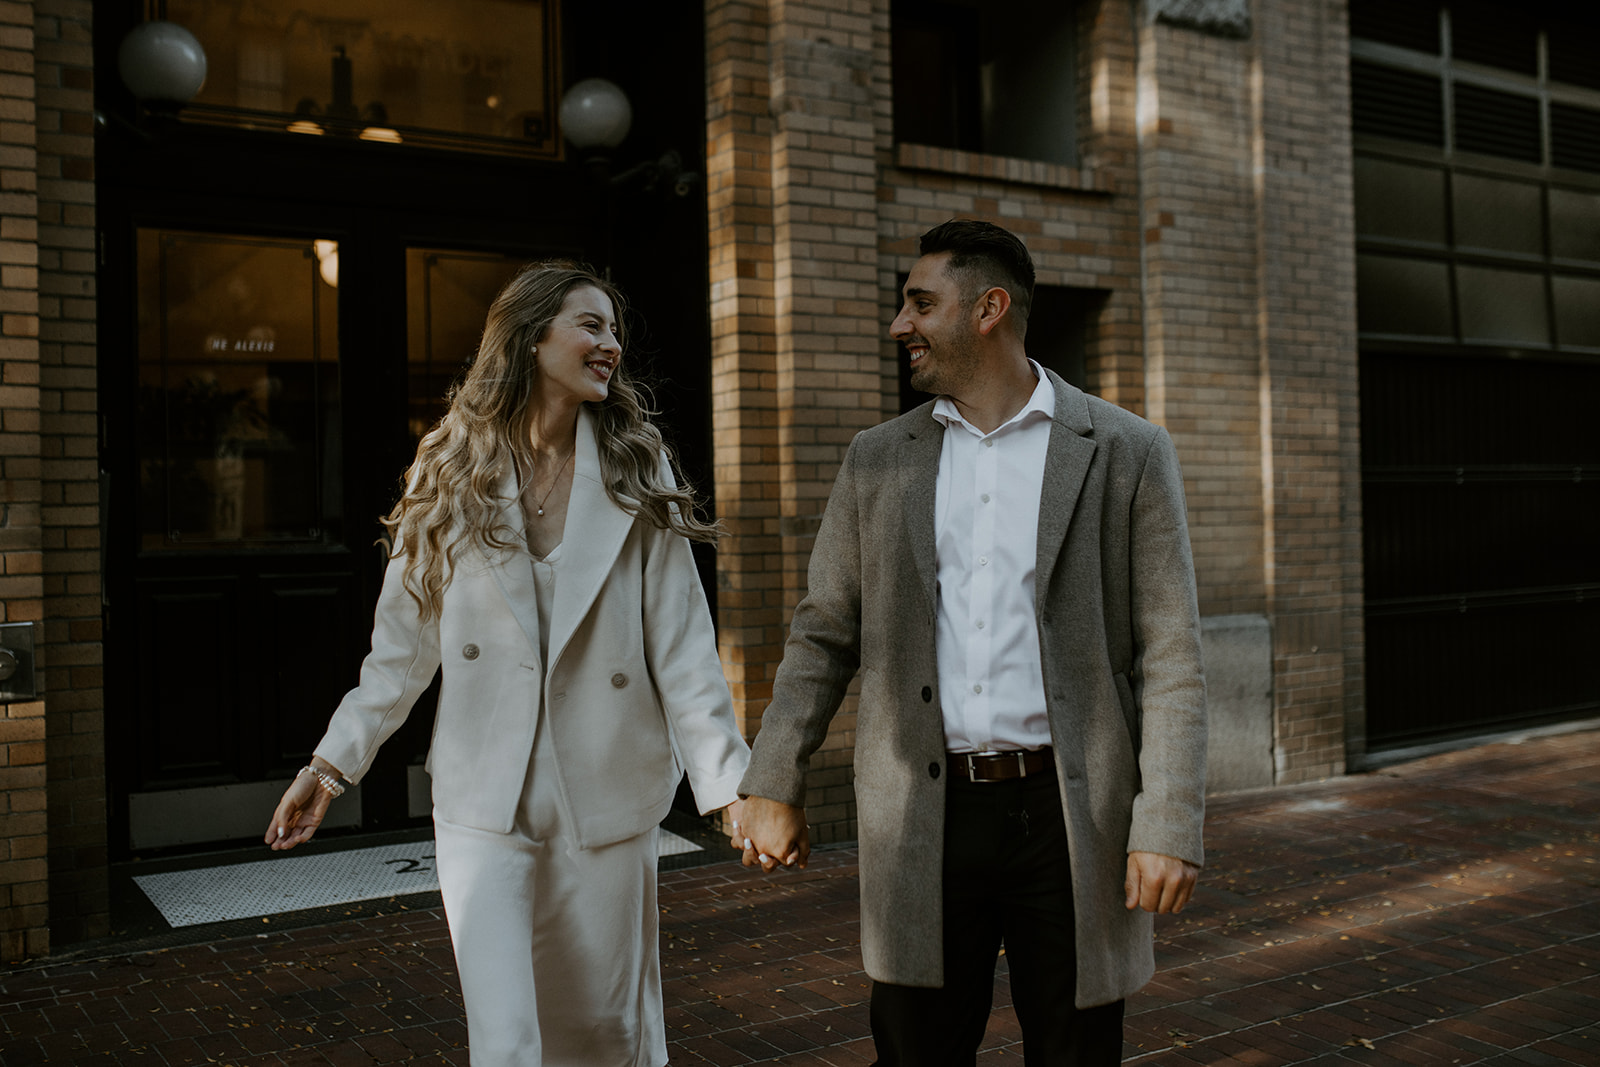 Engagement Photography In Gastown Vancouver